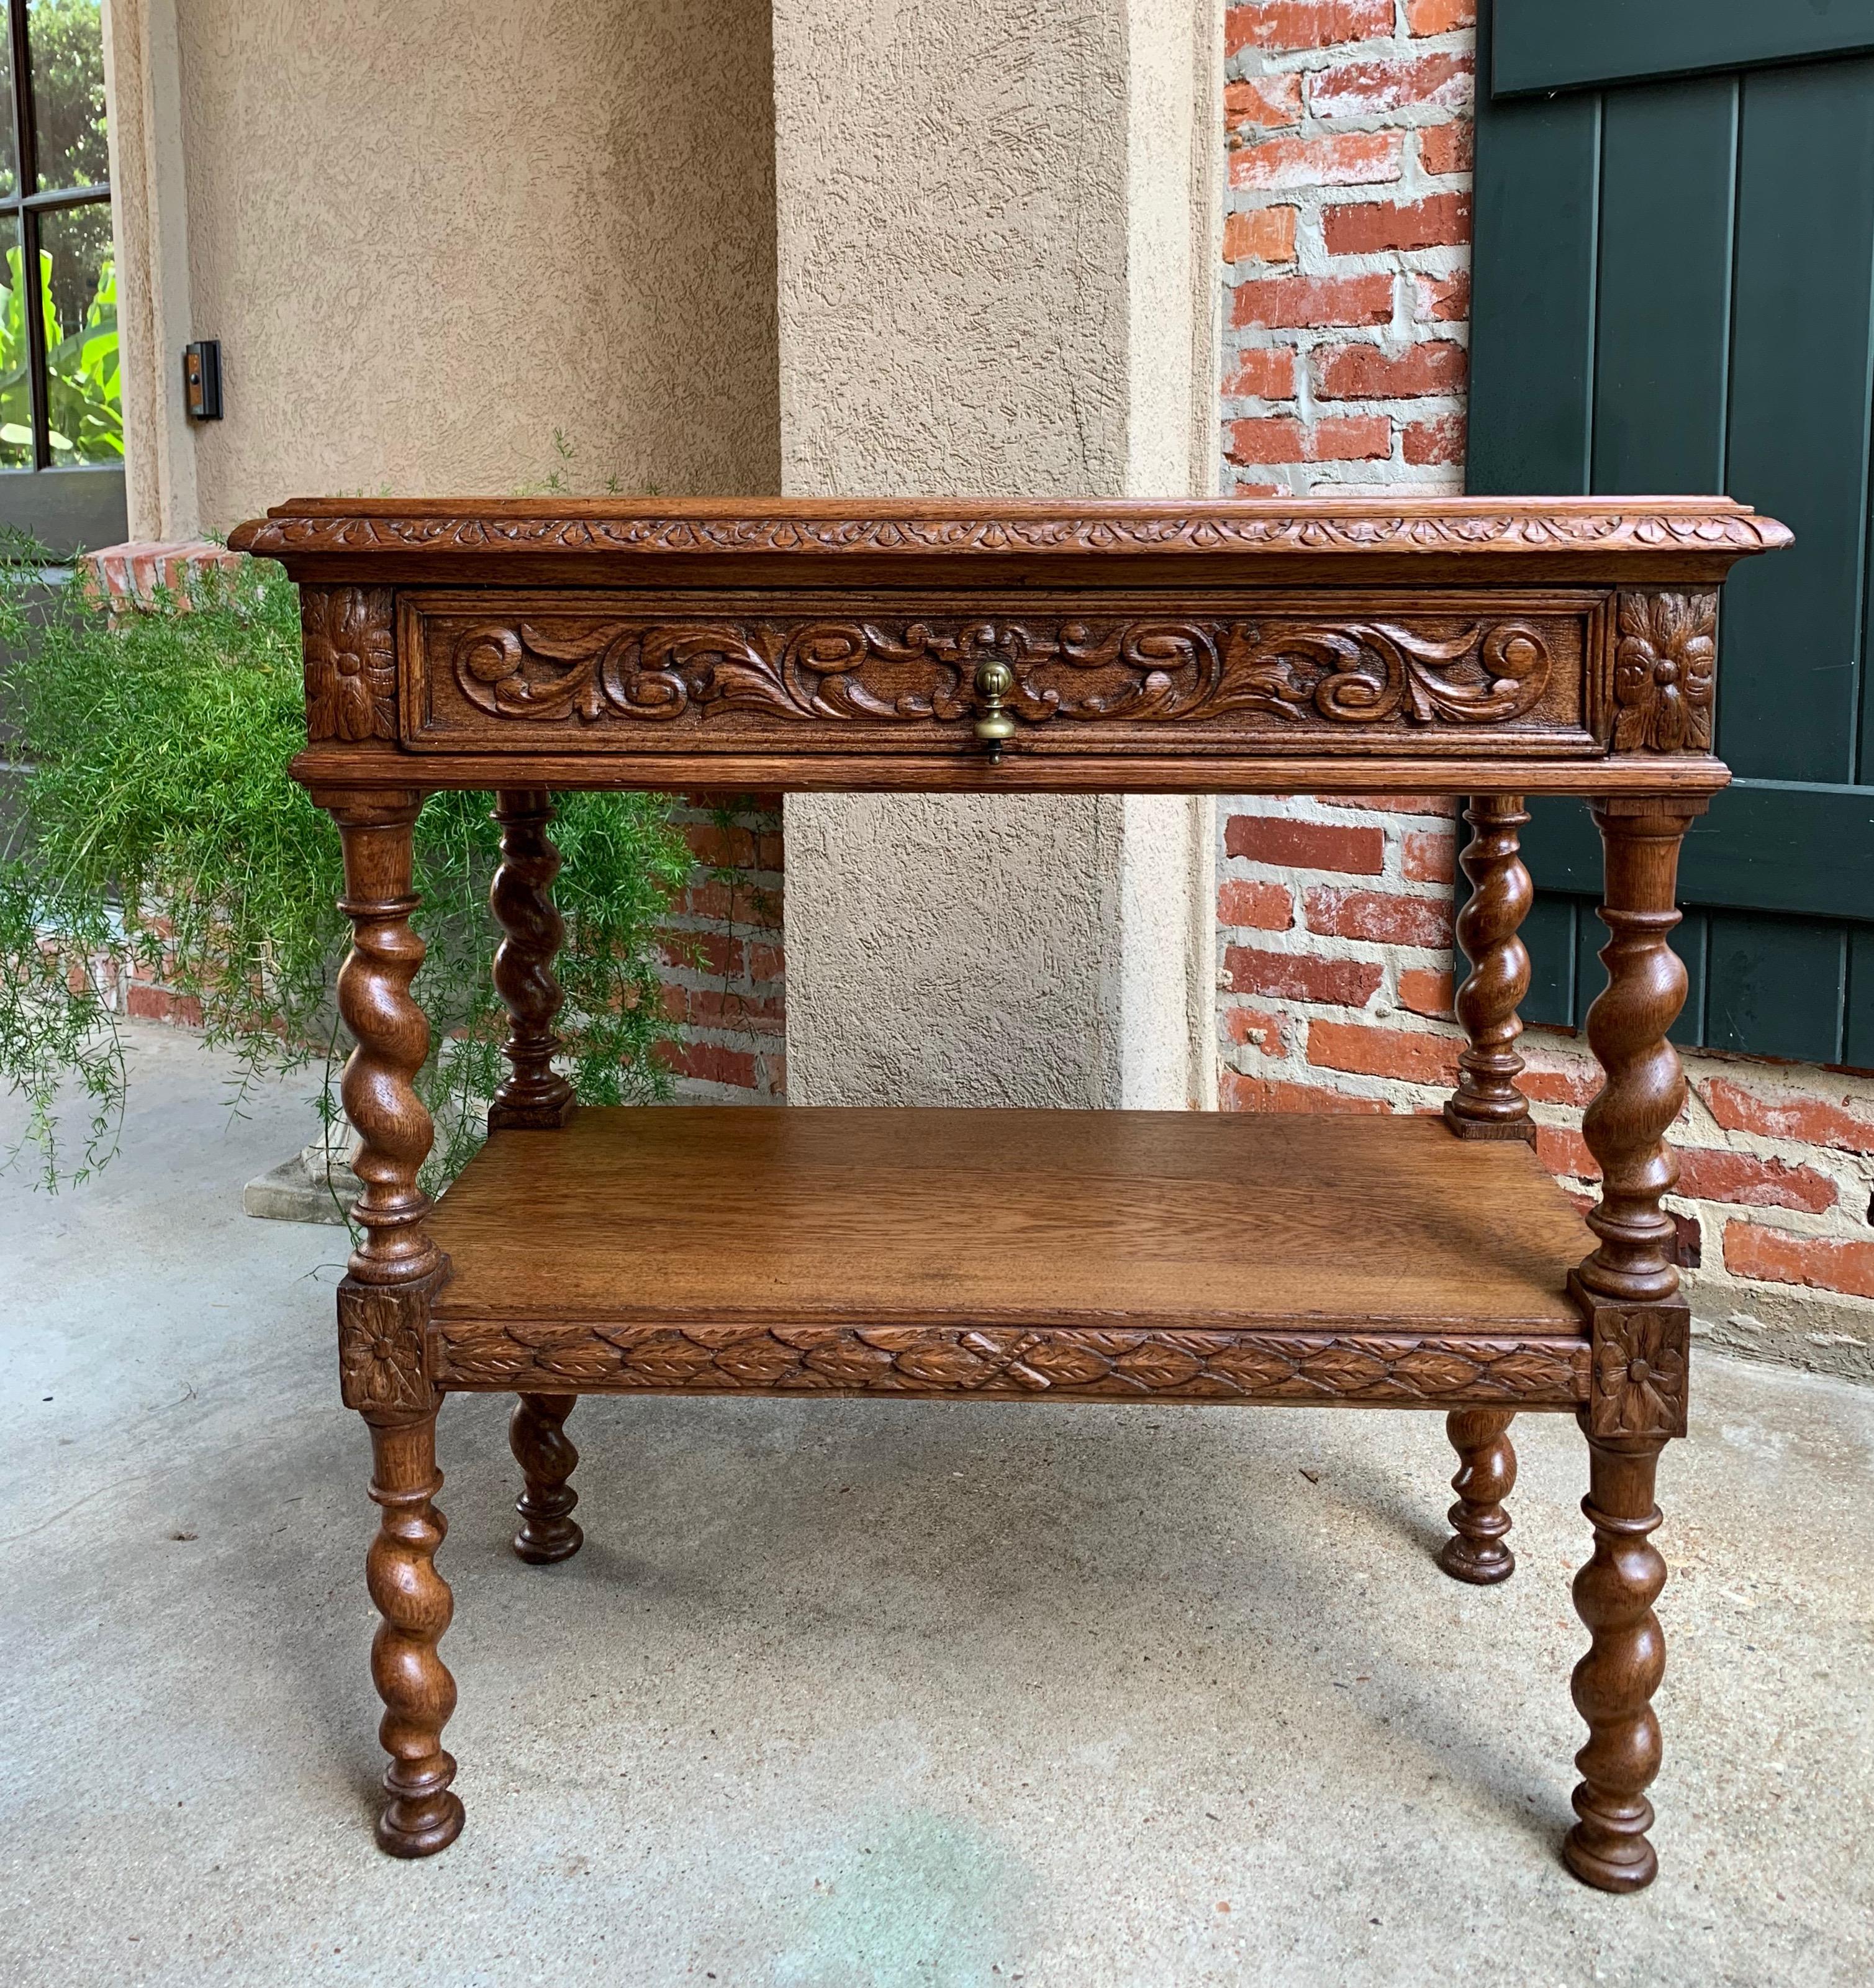 Direct from England, a lovely antique French sideboard or server in a great smaller size with that lighter finish/bleached look everyone is searching for!~
~Carved beveled edge tabletop~
~Full length front drawer with carved Black Forest style